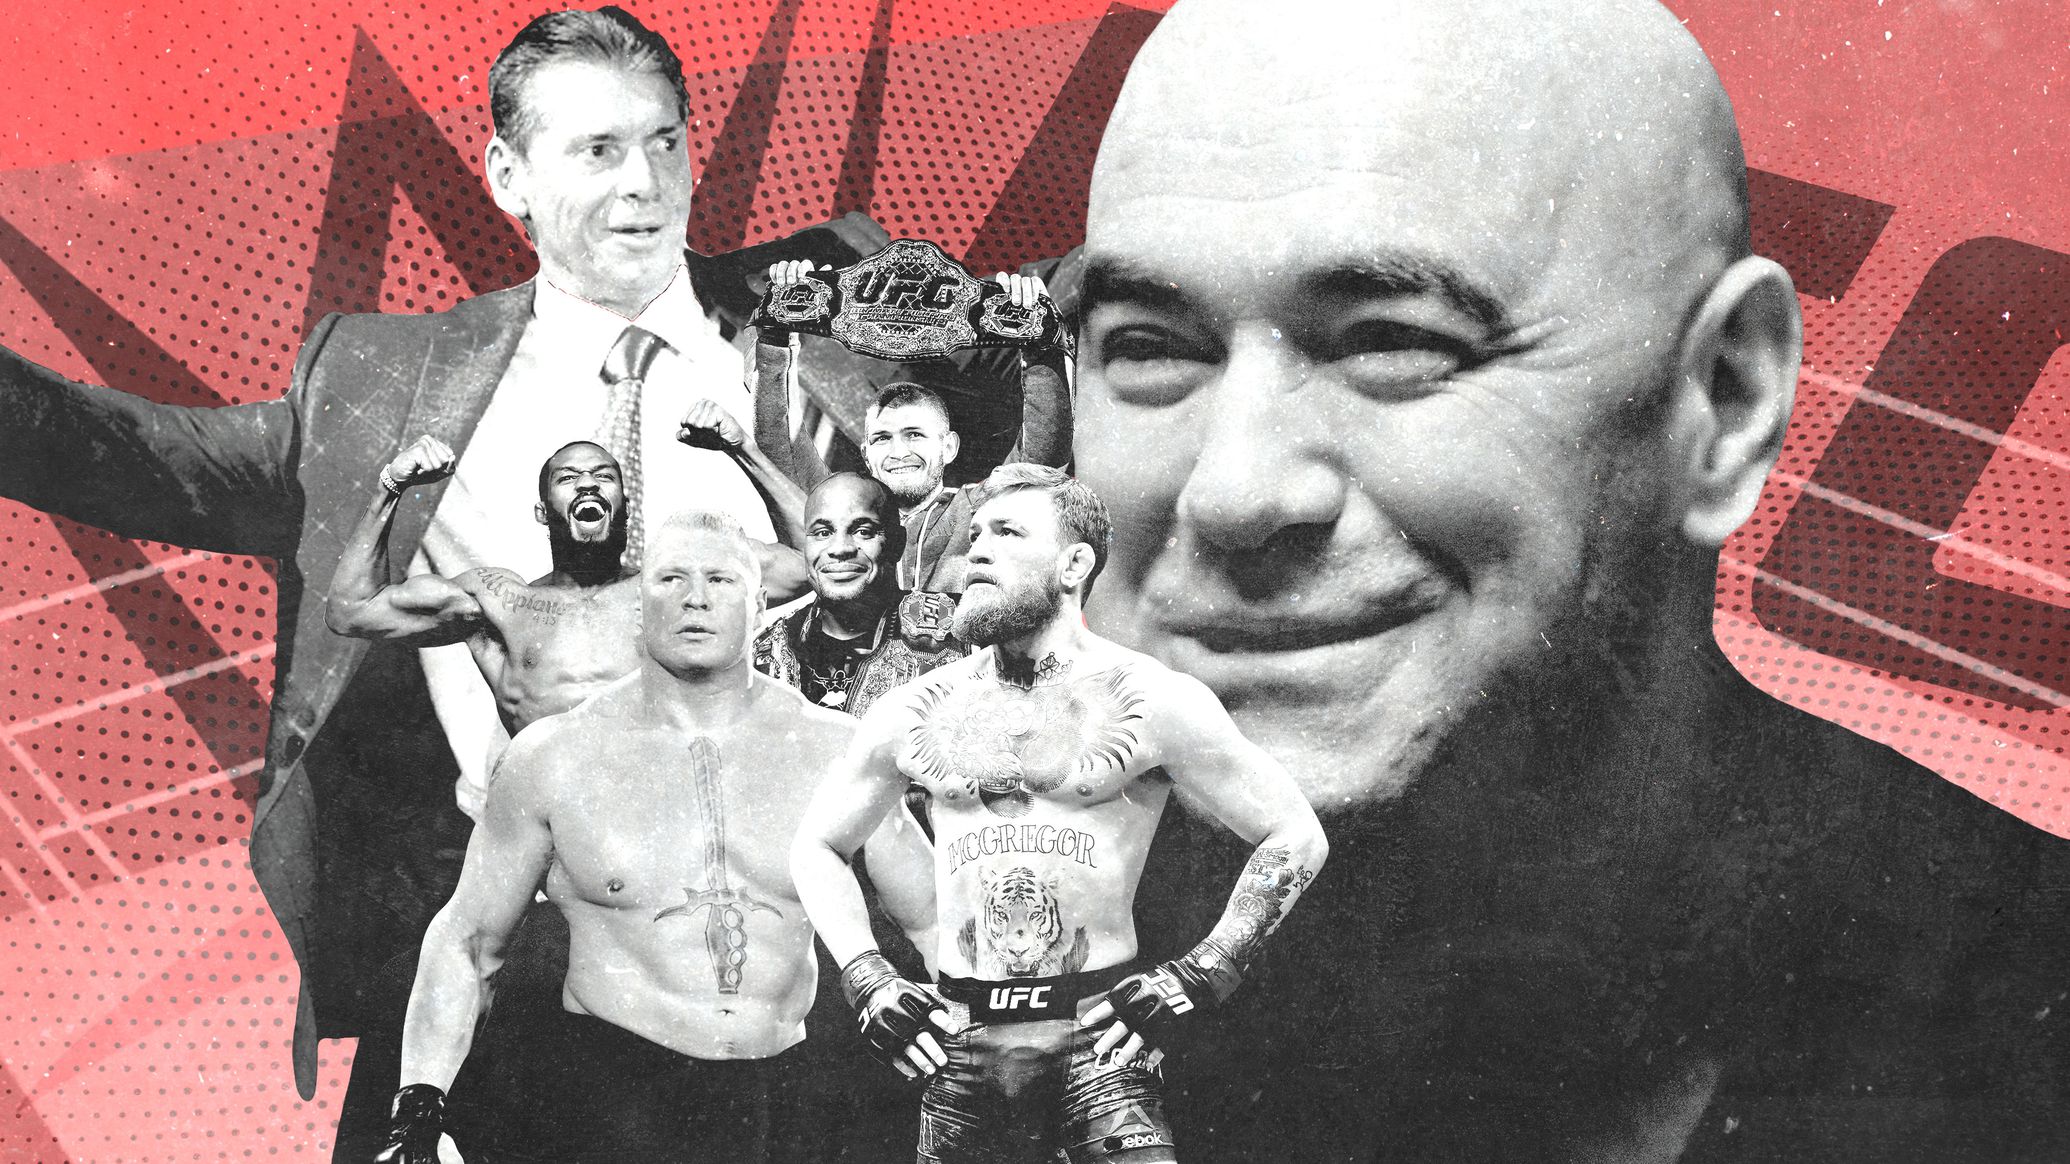 The WWE-ification of UFC